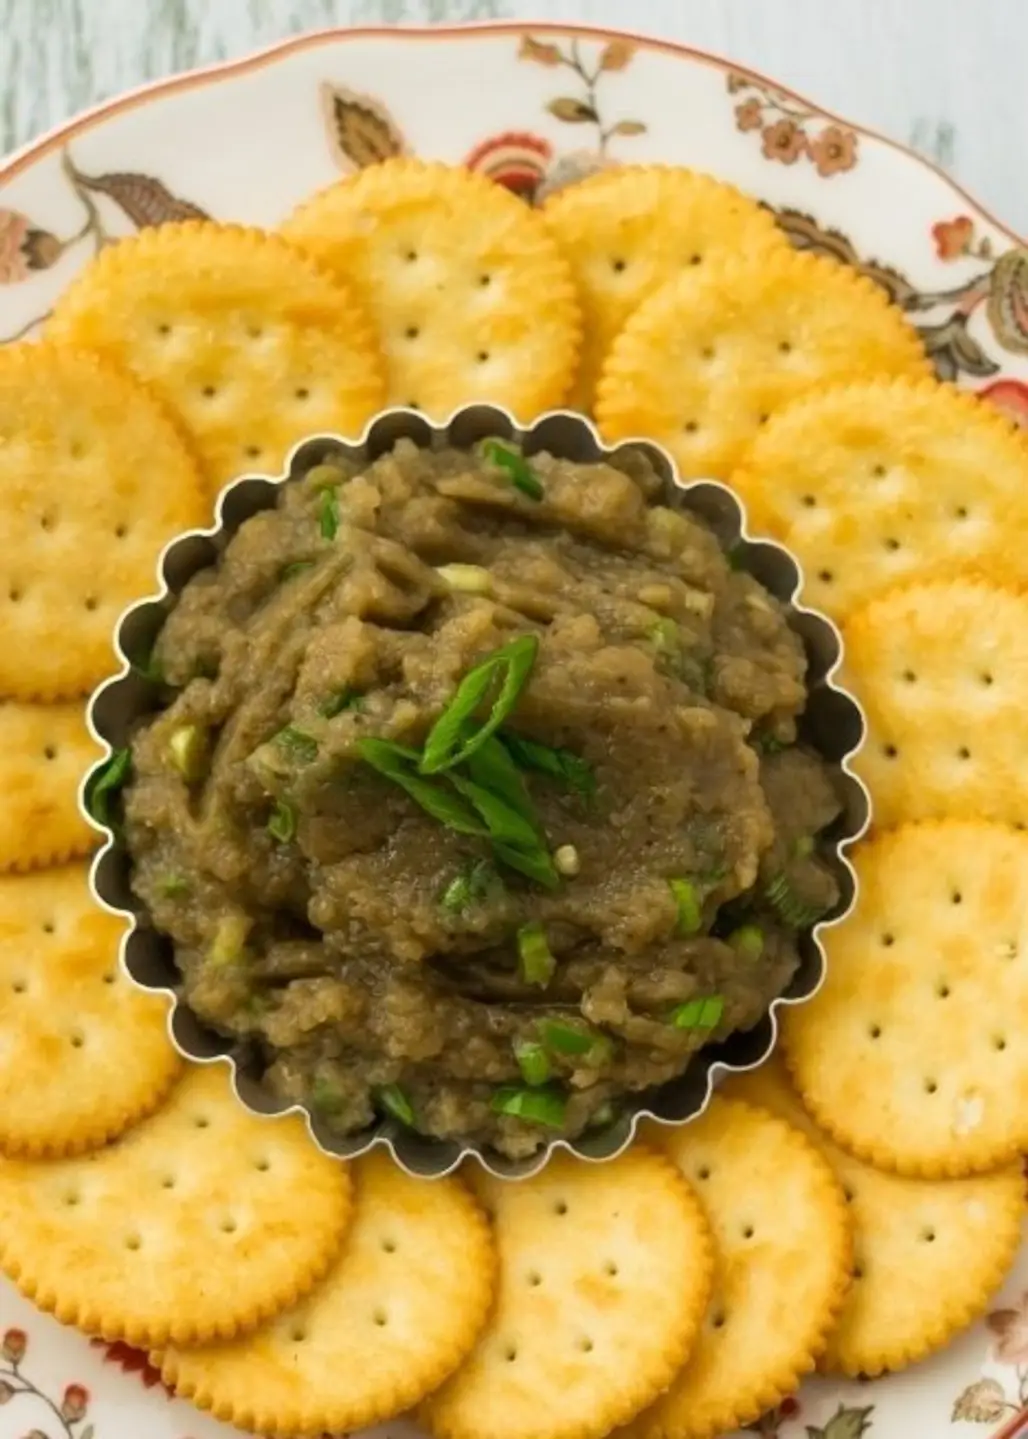 Roasted Eggplant Dip is Highly Flavorful without the Fat